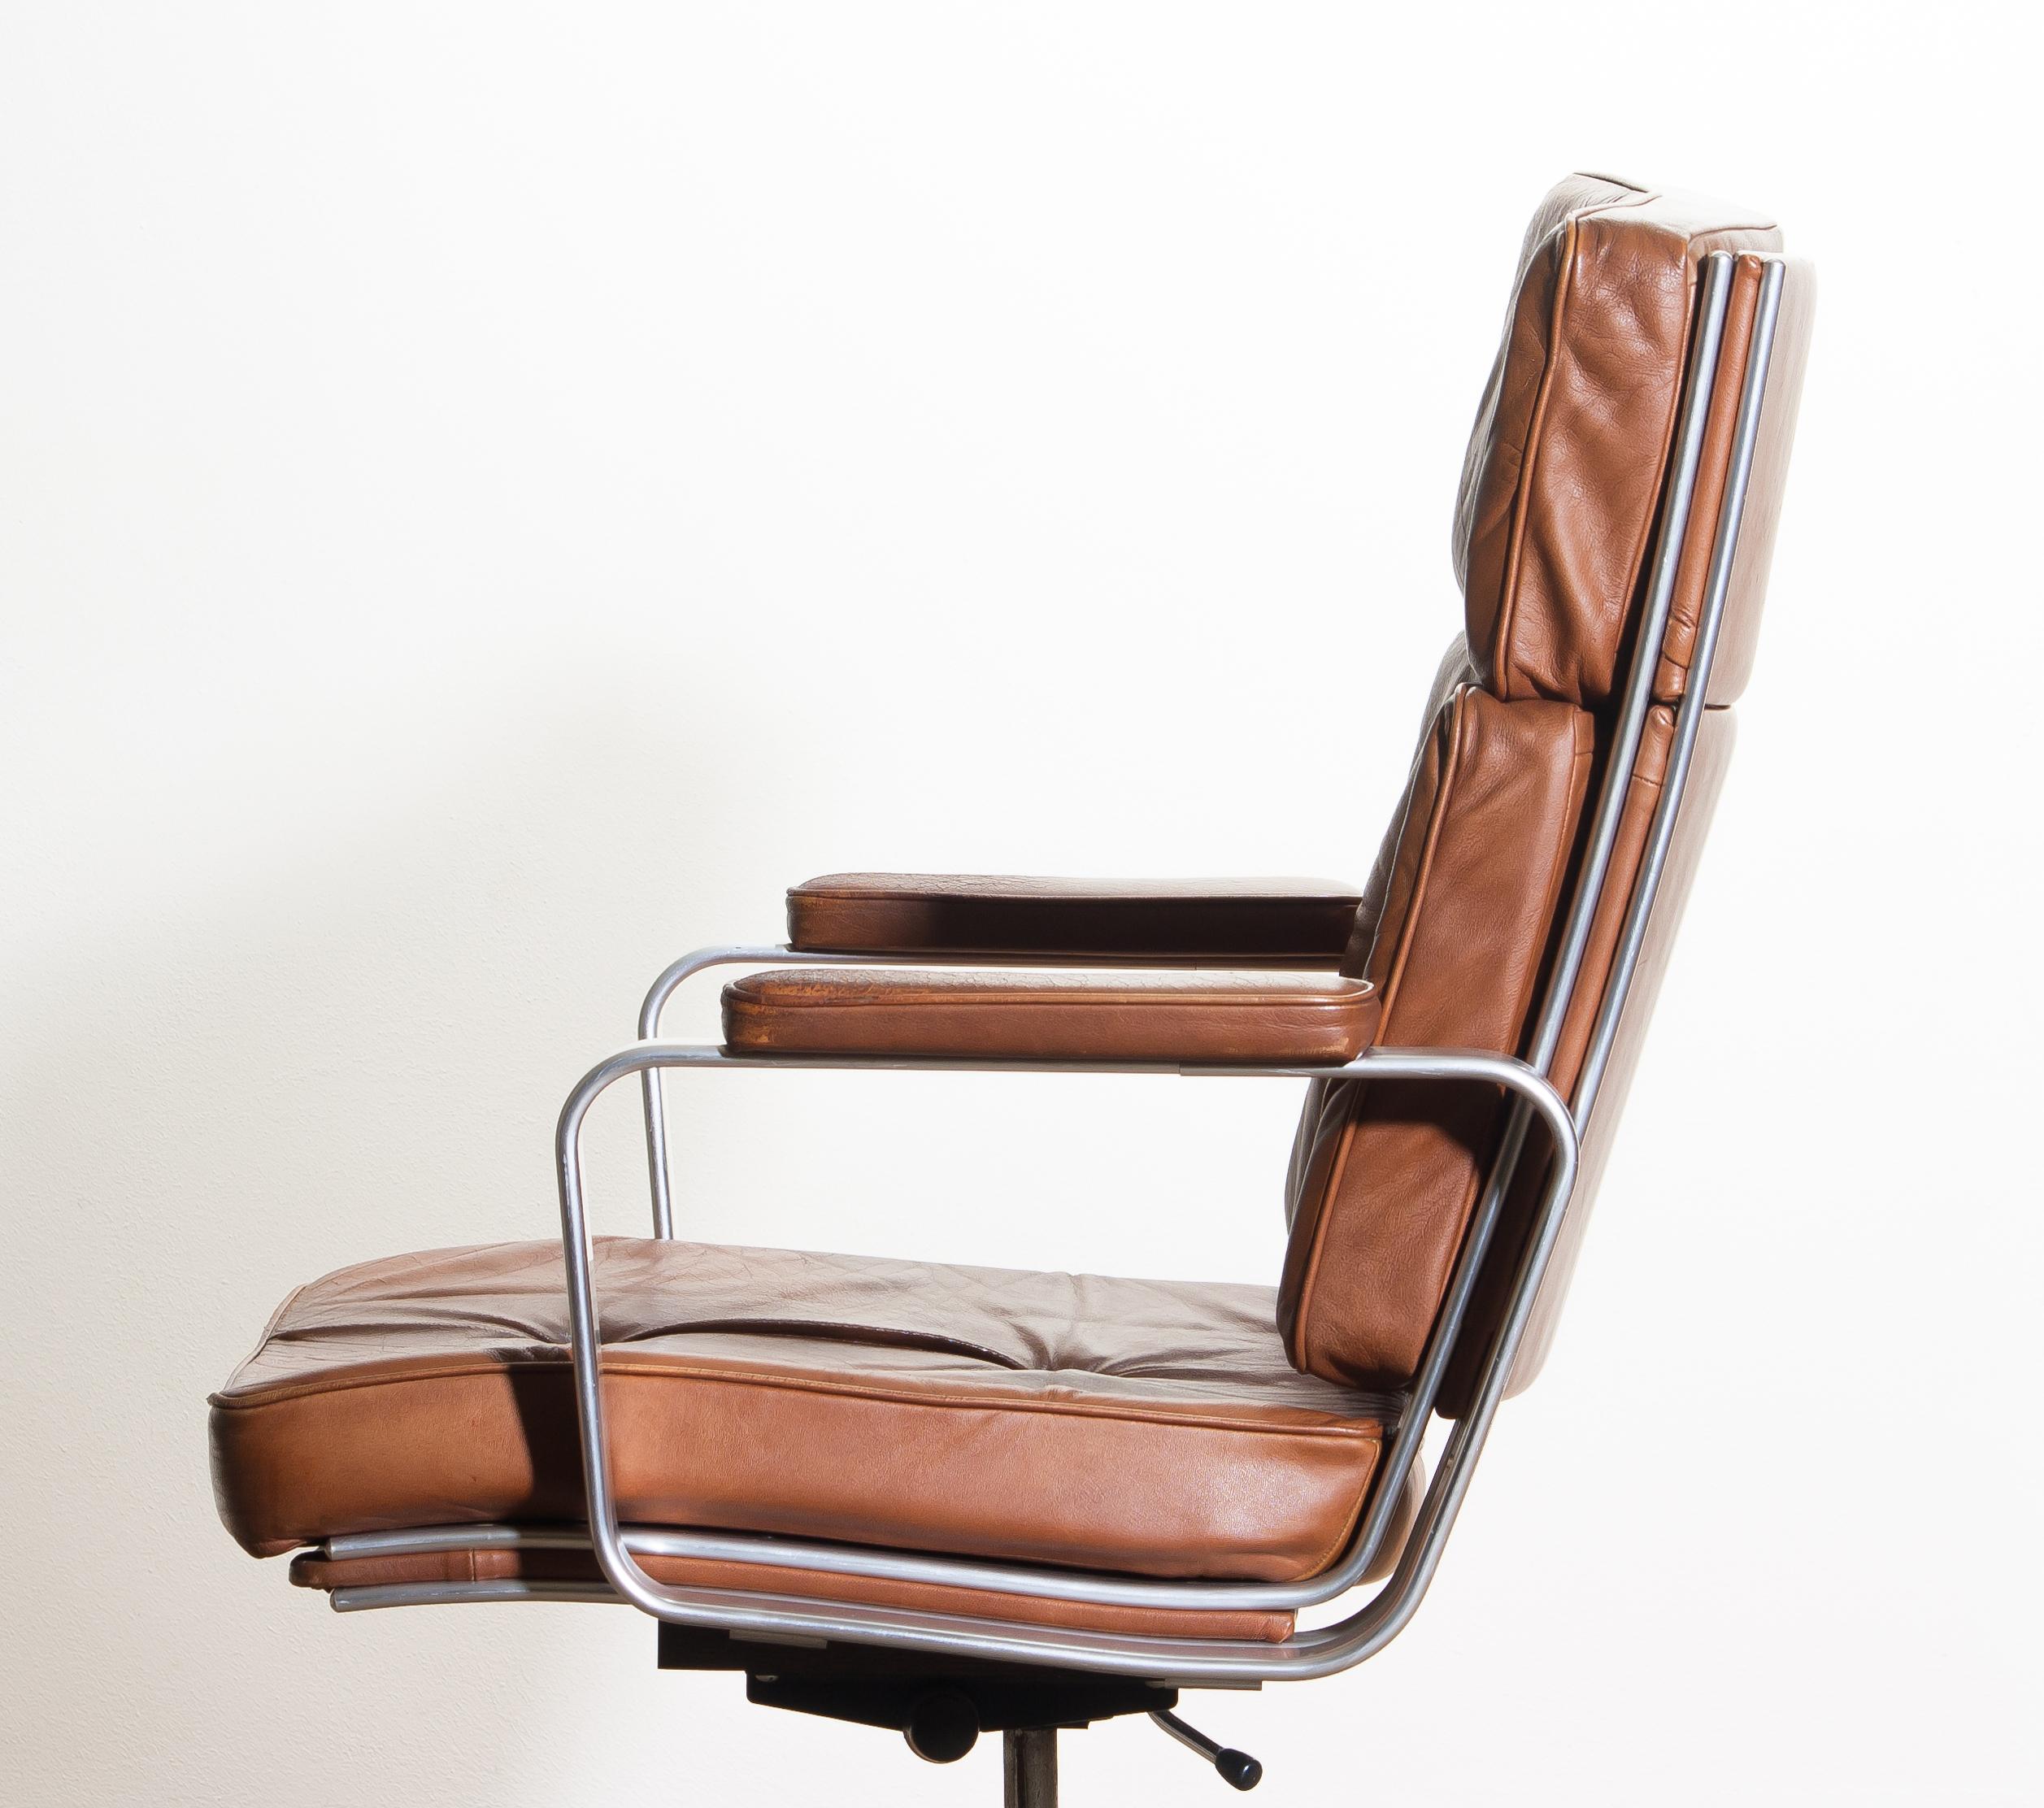 1970s, Brown Leather and Aluminum Desk Chair by Karl Erik Ekselius for Joc 3